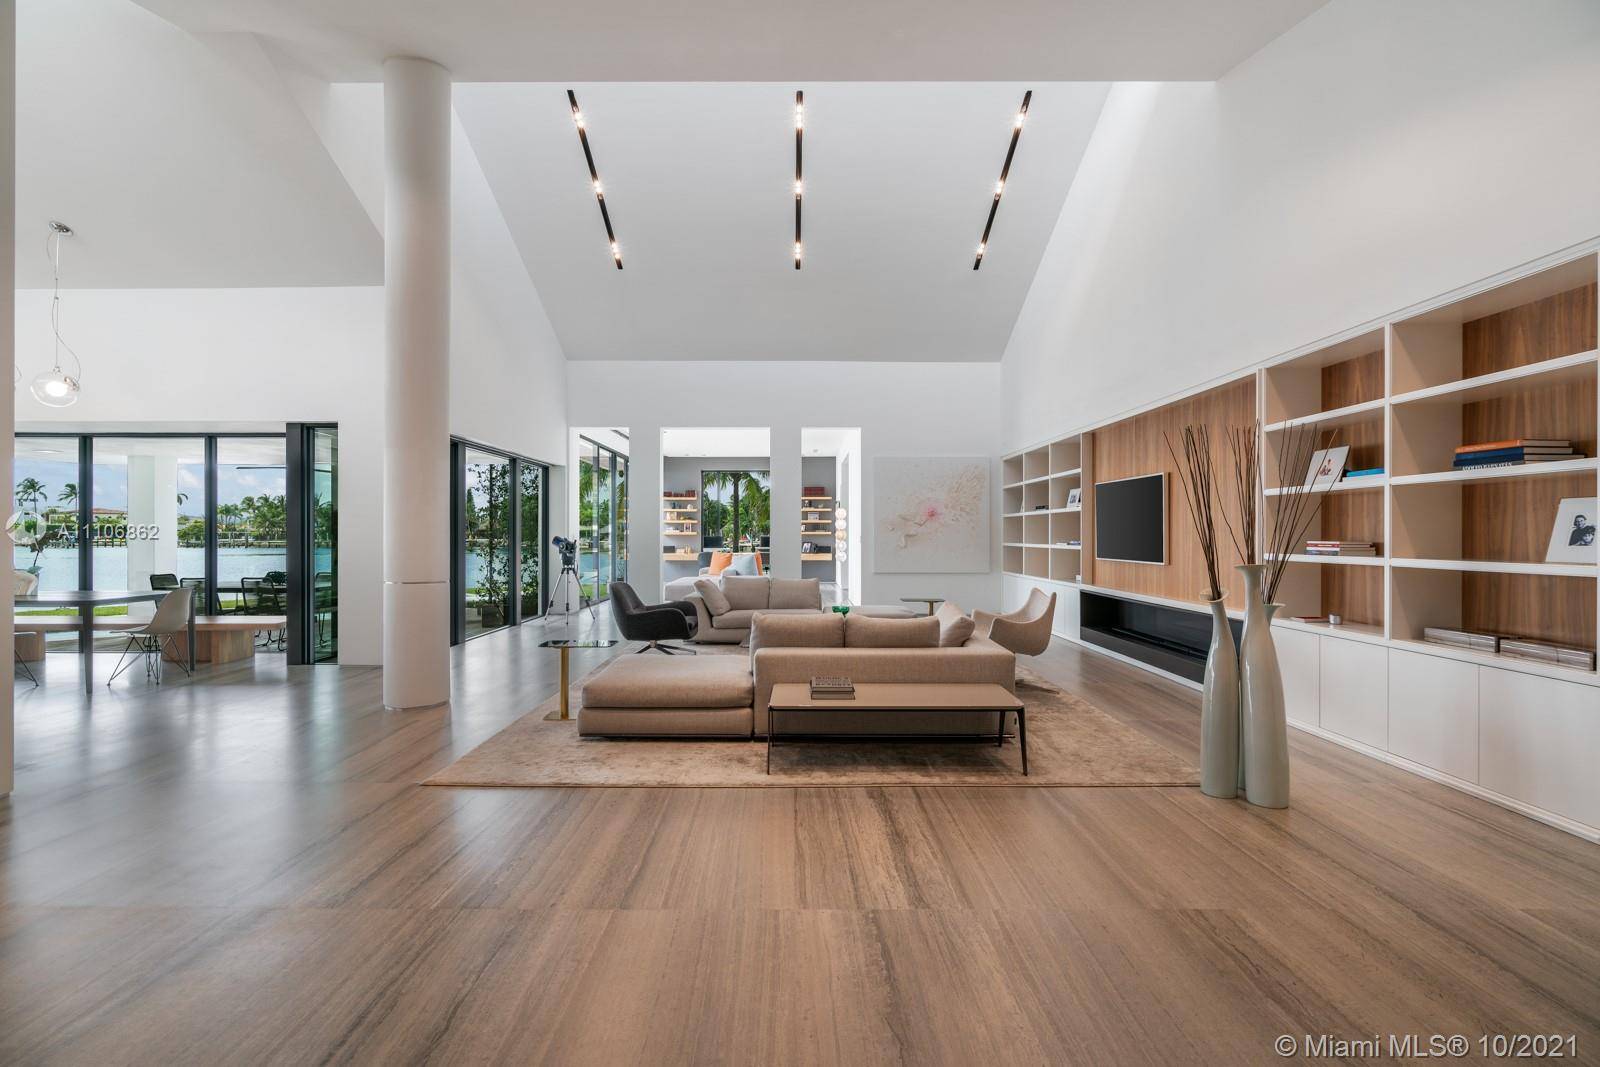 Contemporary Miami Beach tropical home oasis centrally located on guard gated Biscayne Point.